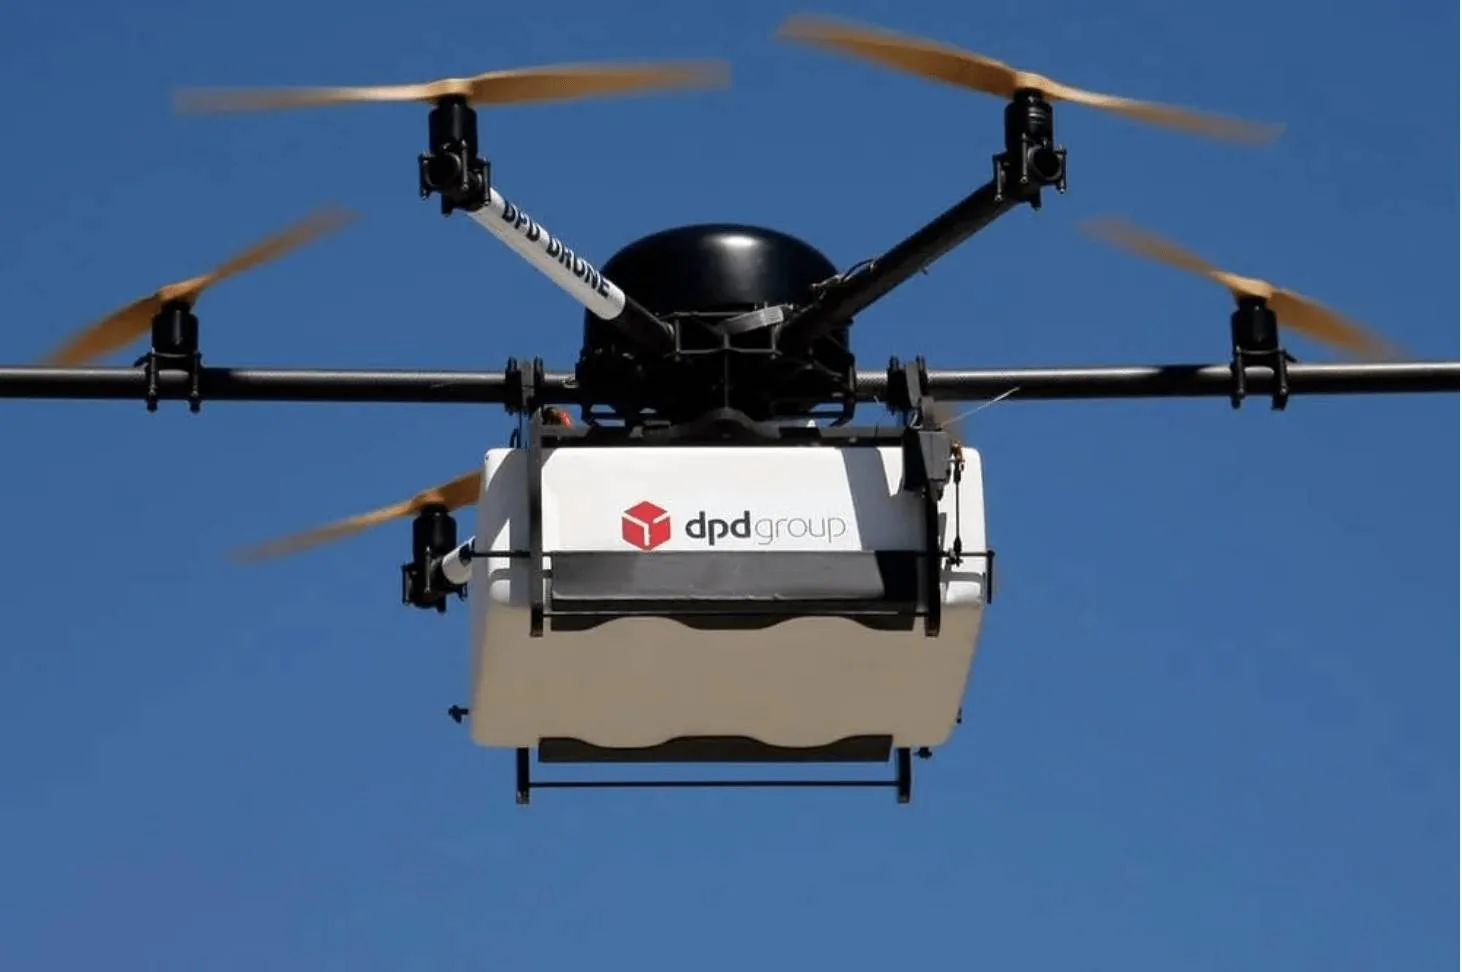 rapid delivery innovation drone carrying package to customer